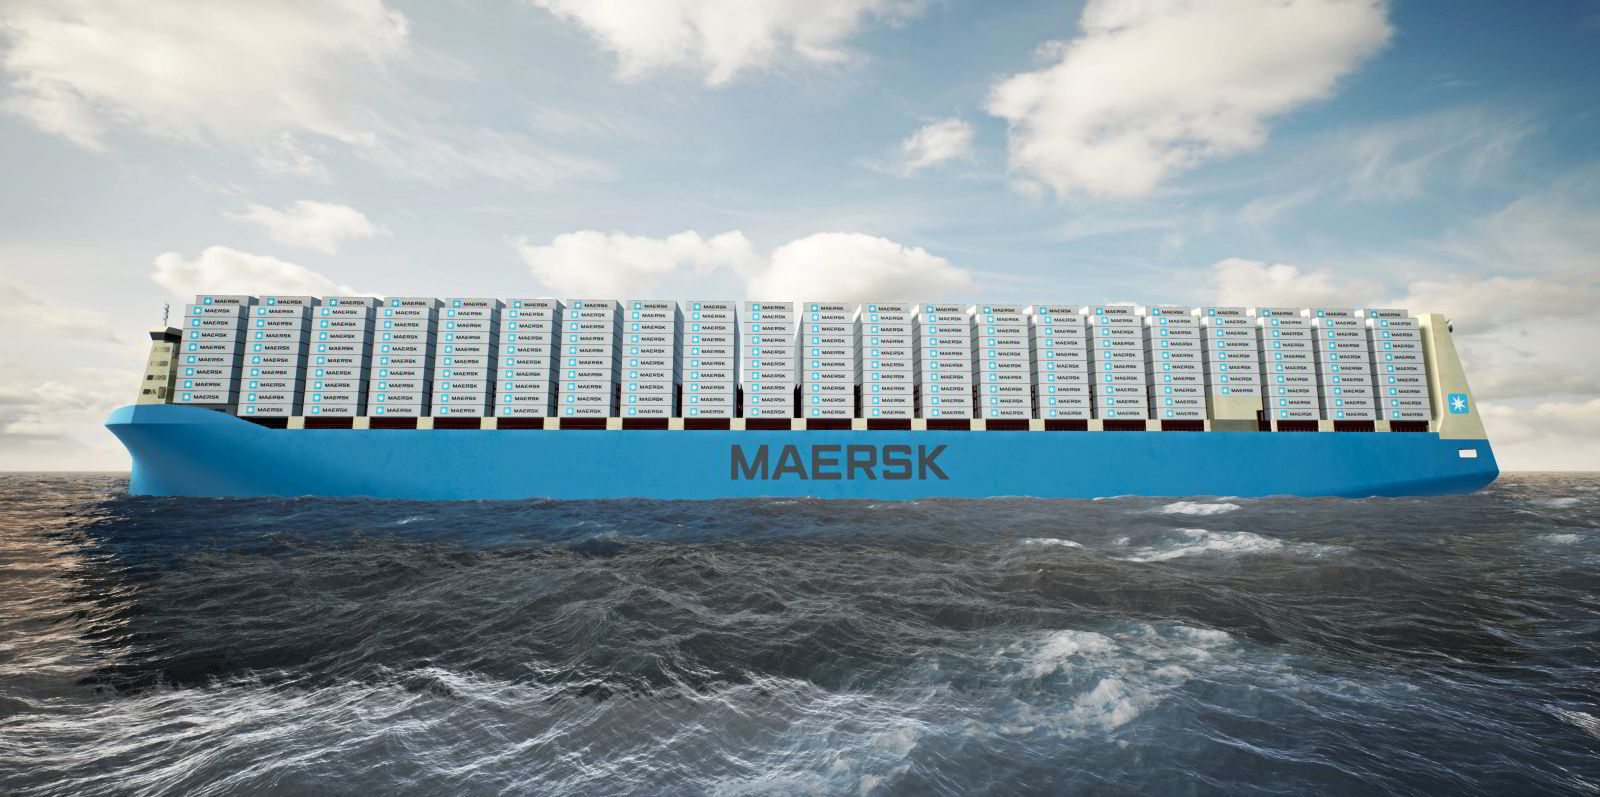 Shipping giant Maersk to become major green hydrogen consumer as it embraces methanol fuel | Recharge